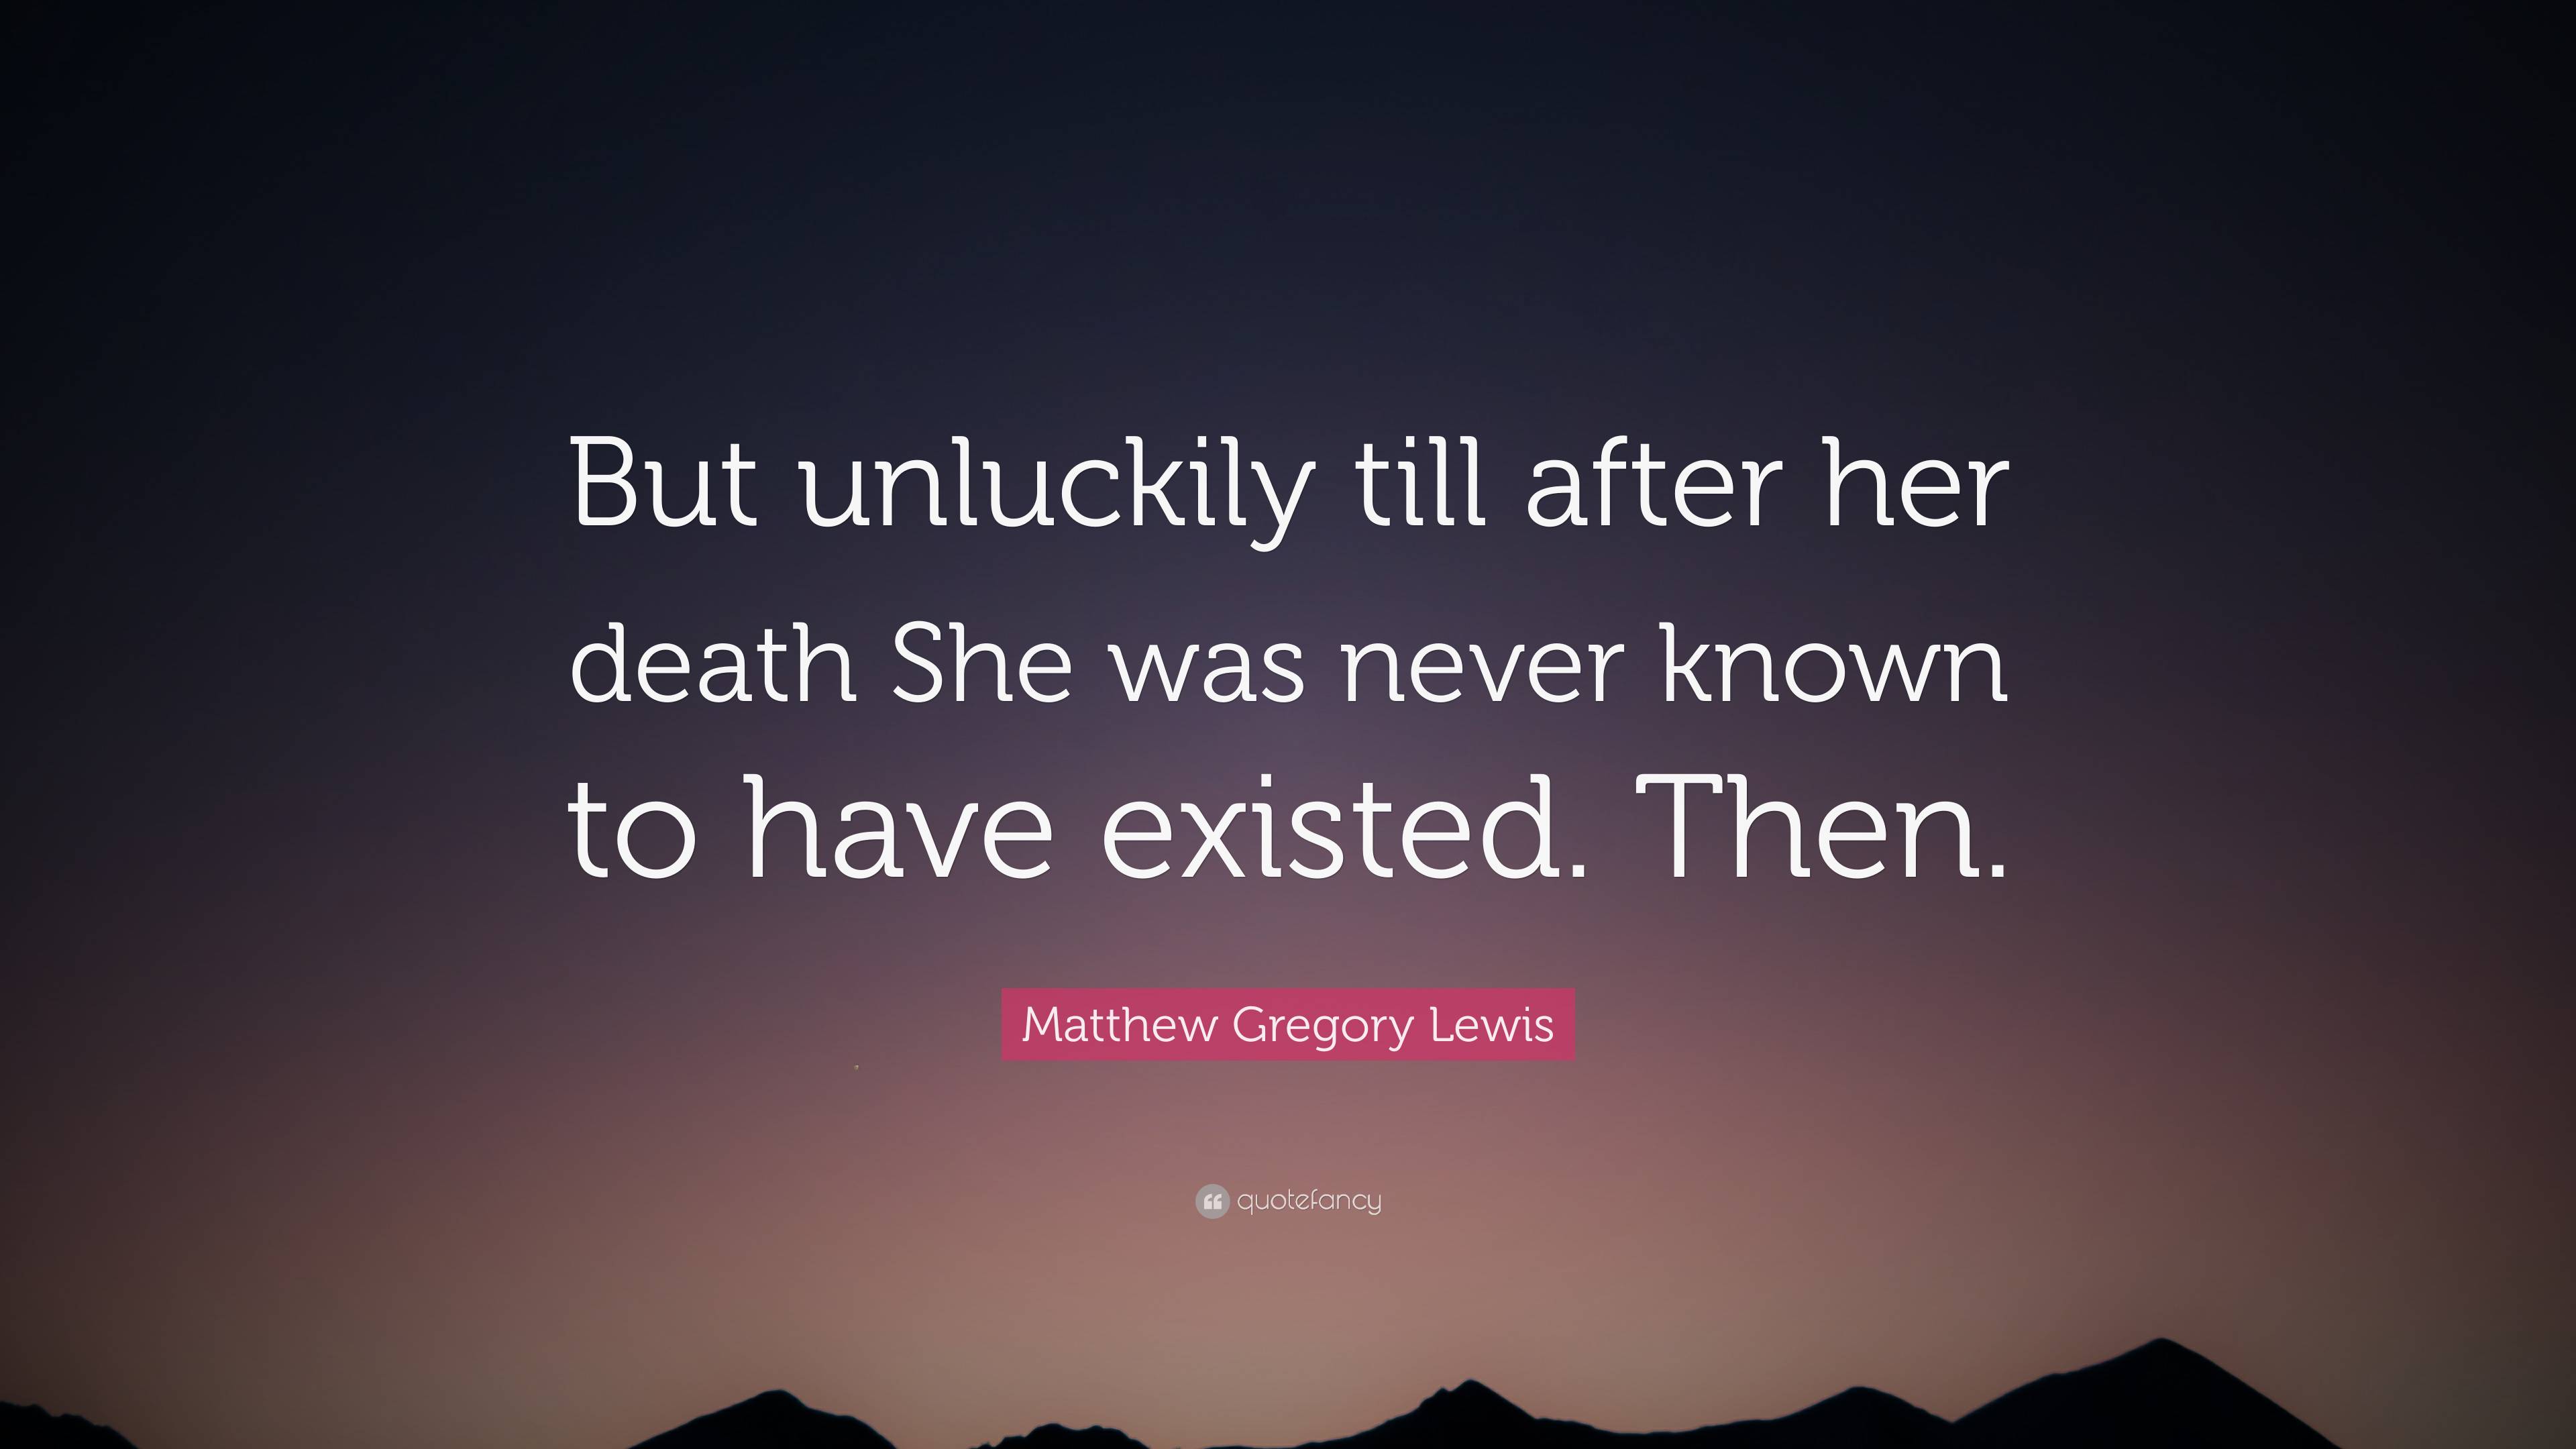 Matthew Gregory Lewis Quote: “But unluckily till after her death She ...